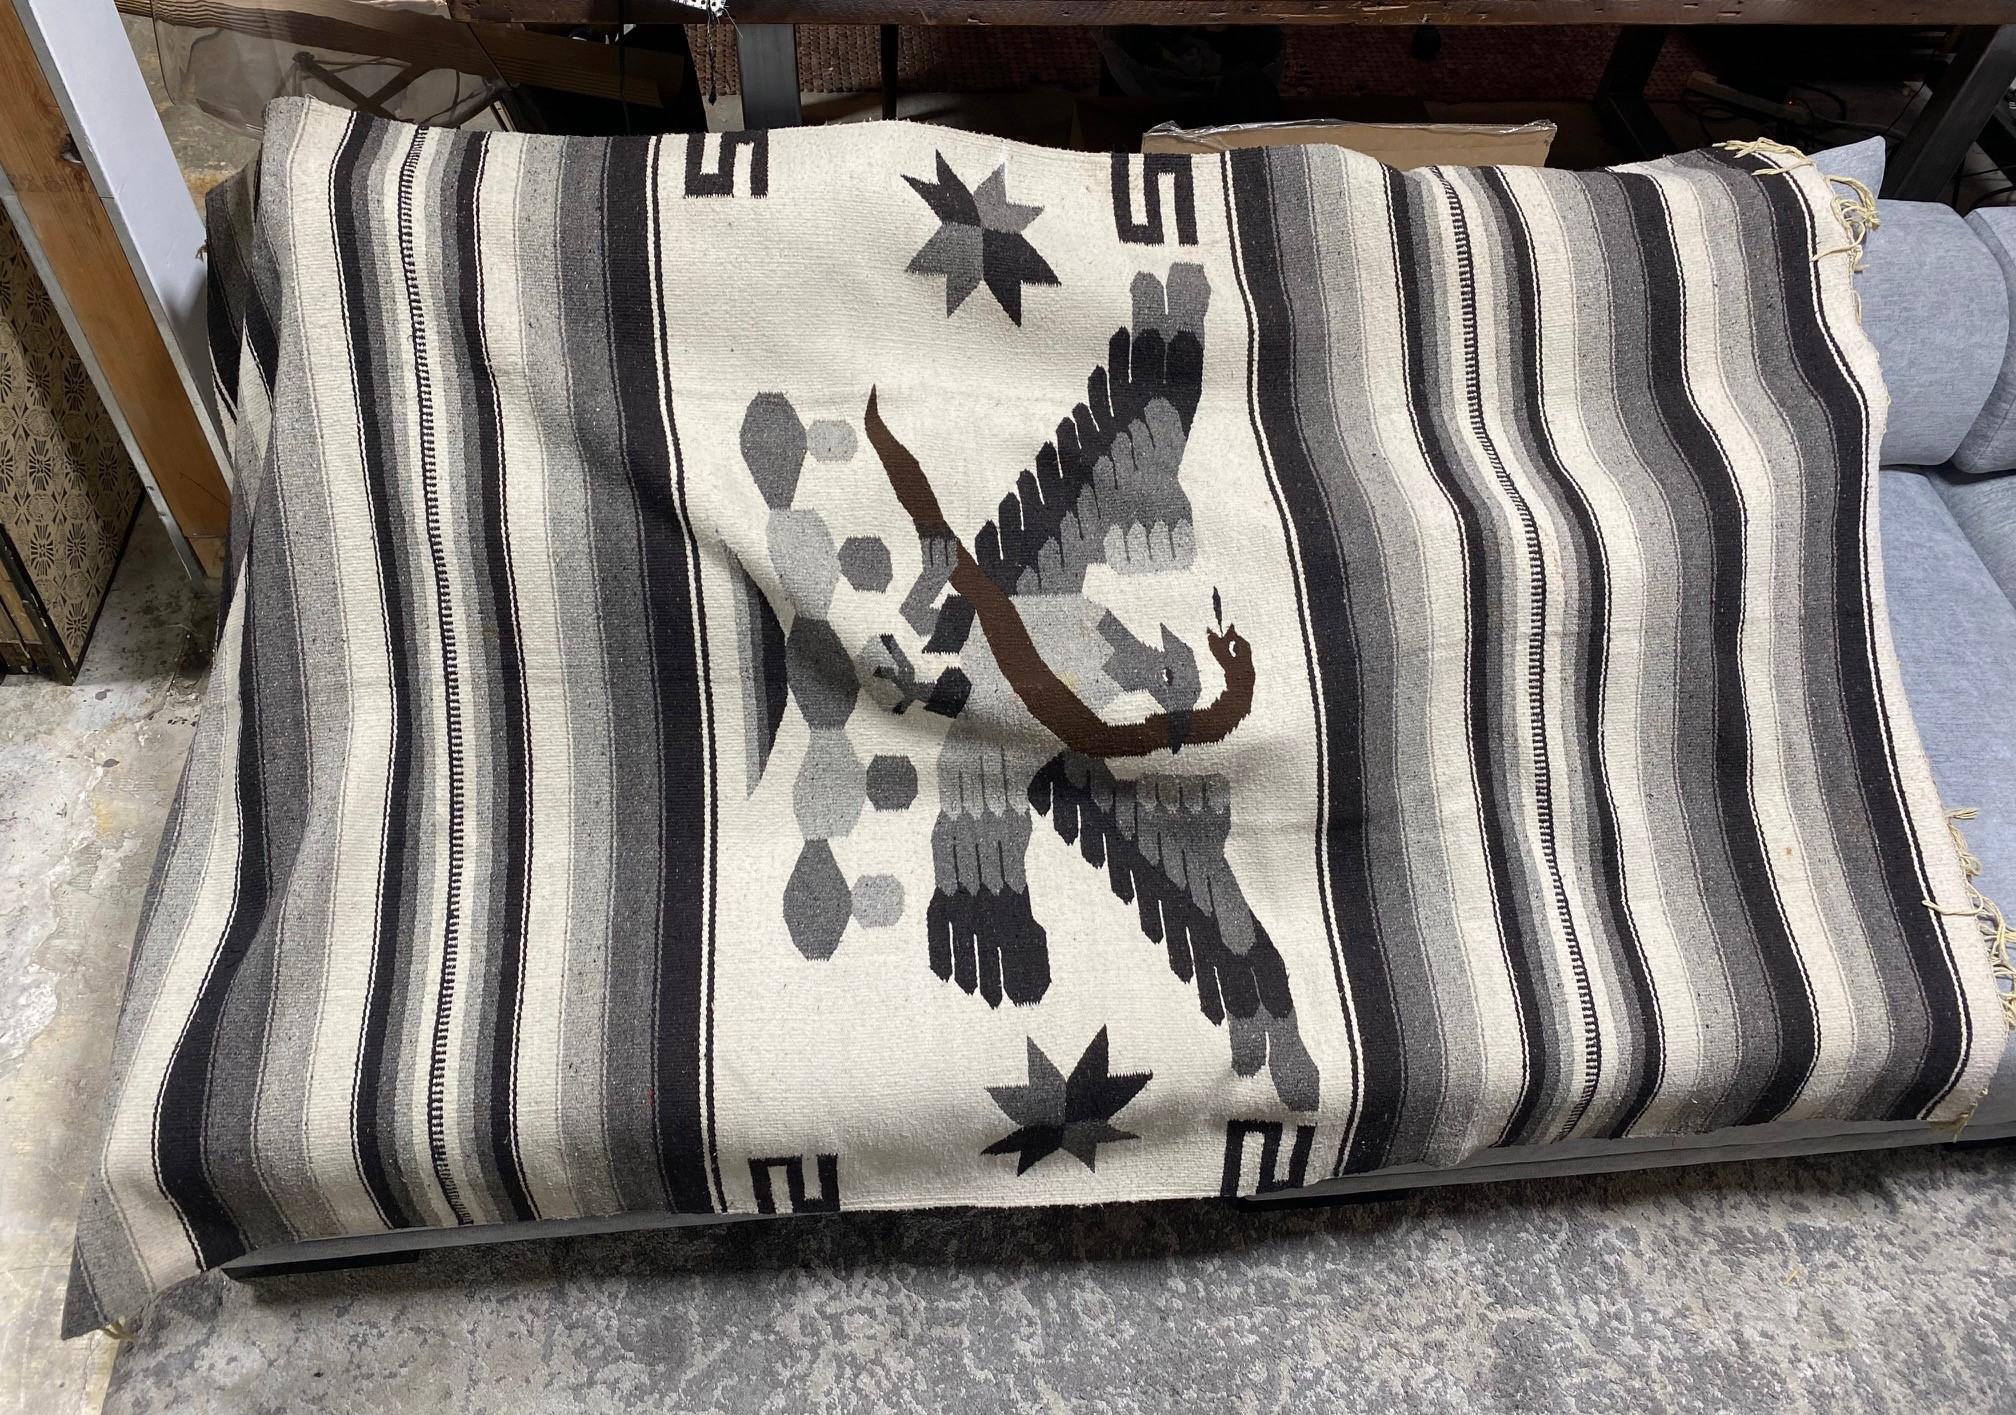 A wonderful large North American Mexican hand-woven Kilim Serape Blanket/Rug featuring a beautiful black, white and grayscale color tone. The piece features the national Mexican icons of the eagle and snake. A fantastic combination of colors and